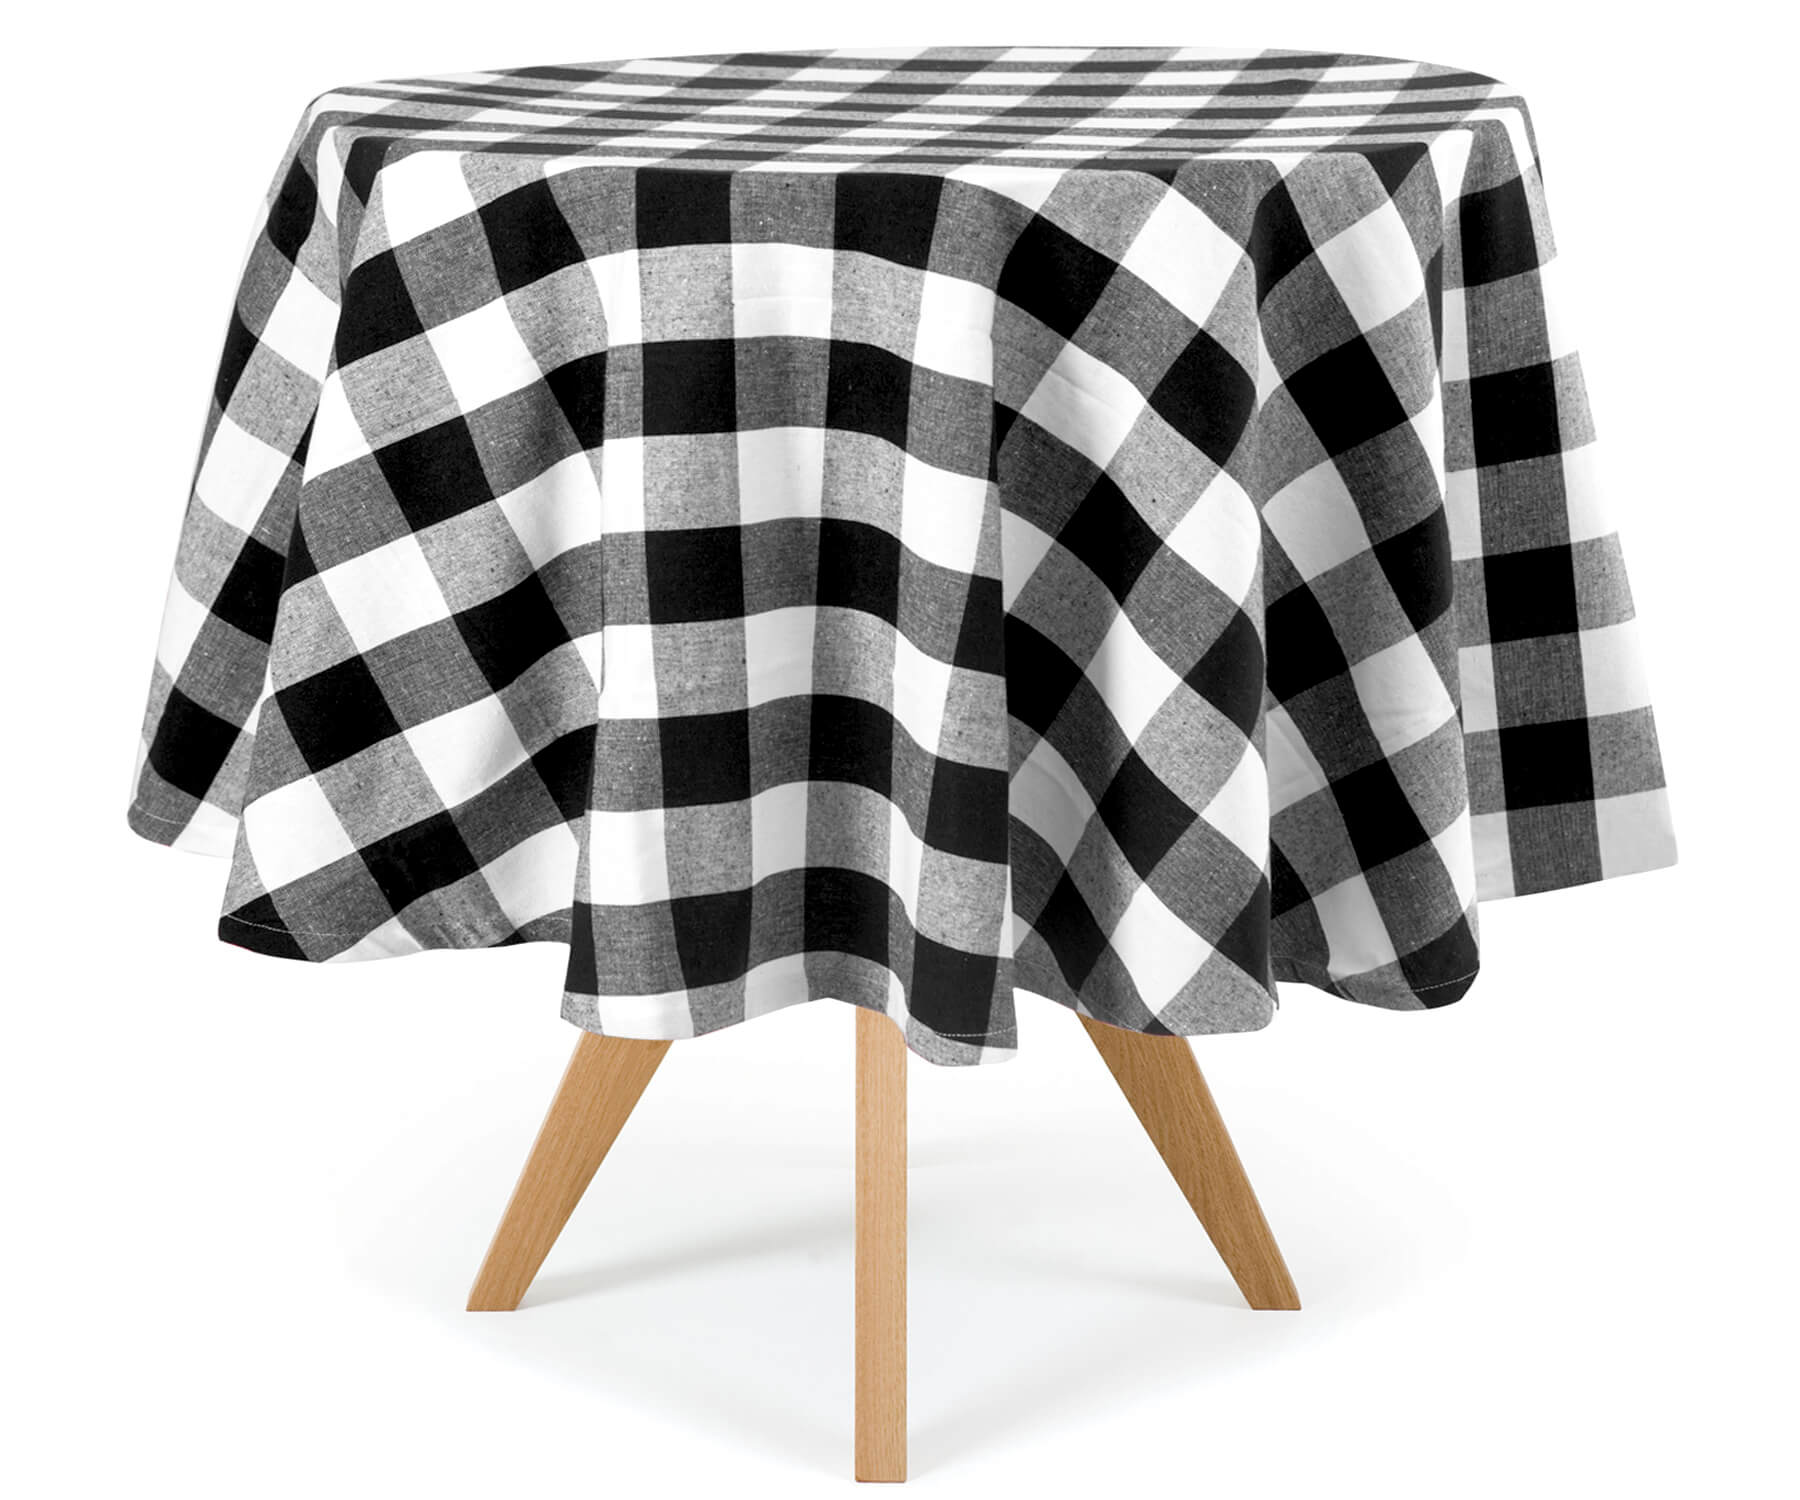 Choose from black, round, white tablecloths, and 60 round tablecloth options to suit your dining needs with style and versatility.